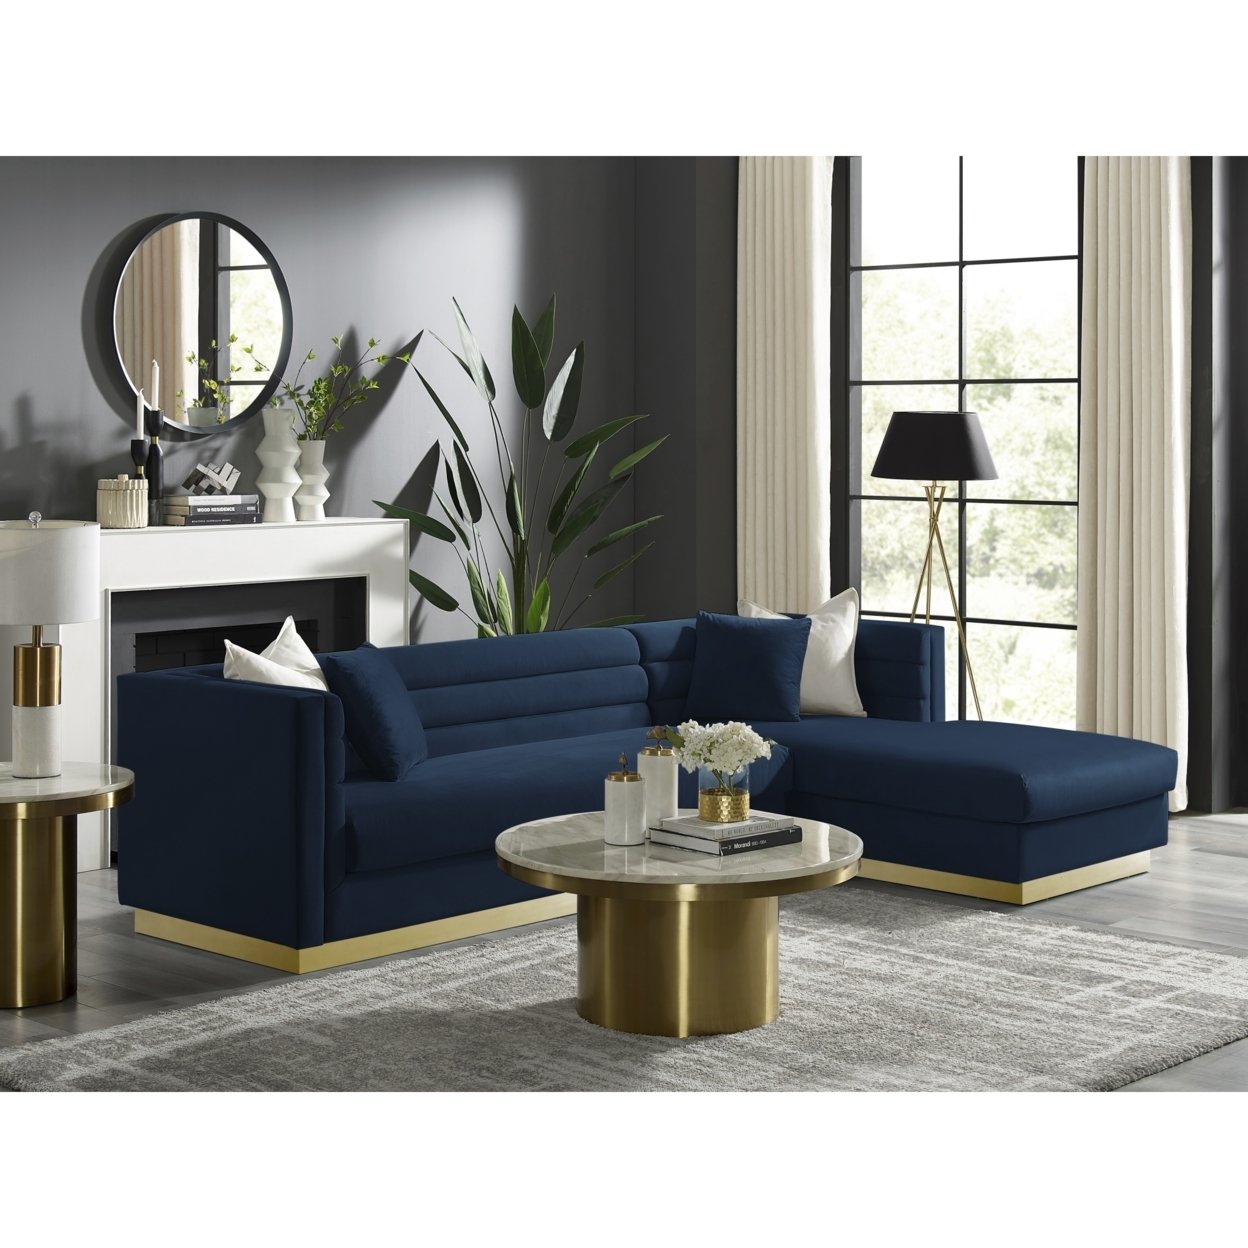 Aja Sofa-Upholstered-Modern-Metal Base, Square Arms-Horizontal Channel Tufting - navy - navy blue